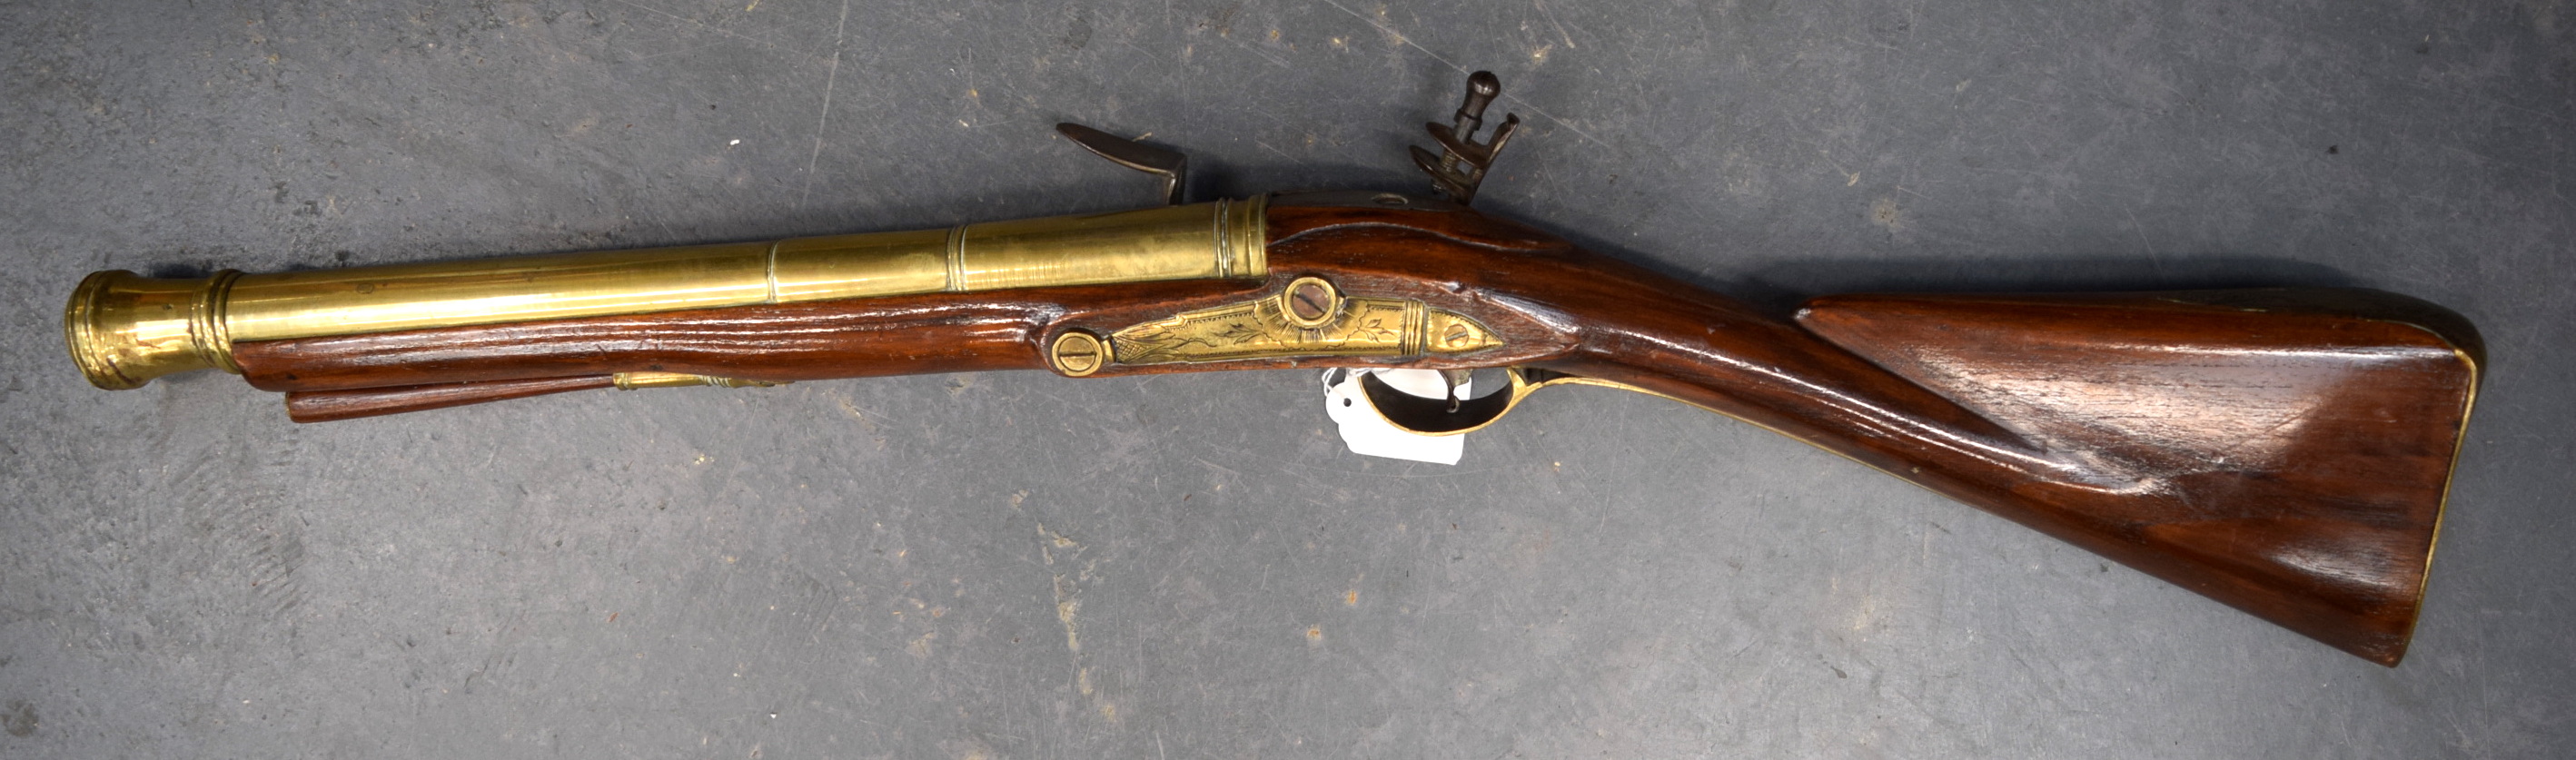 A BLUNDERBUSS, formed with a brass barrel. 78 cm long. - Image 2 of 2